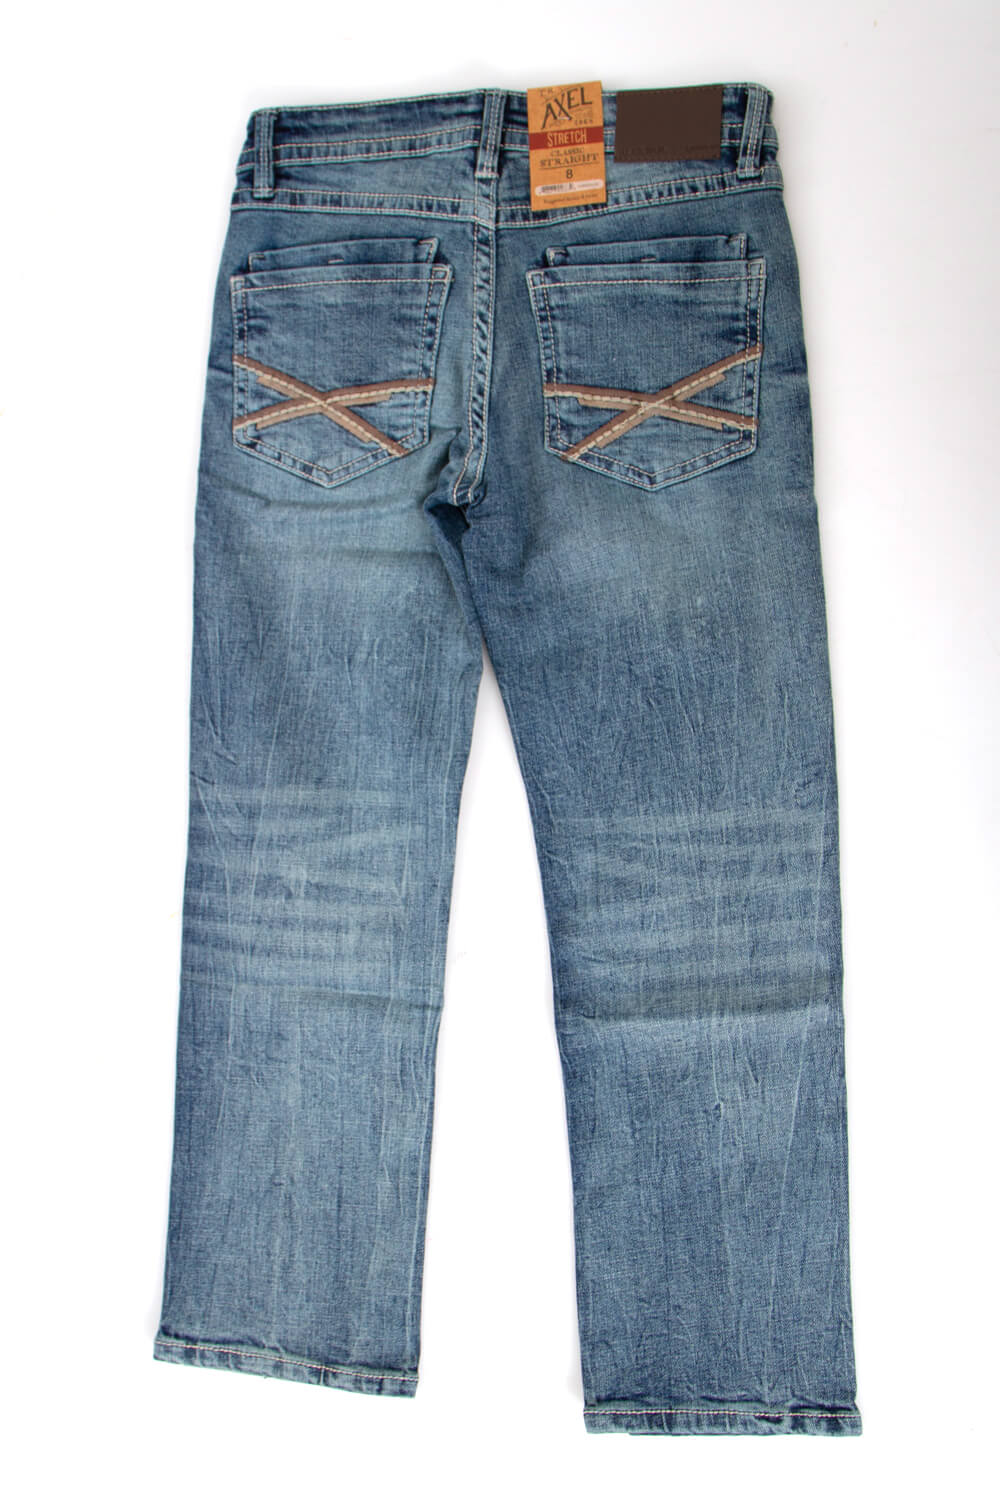 Axel Jeans Sam Classic Straight Leg Jeans for Boys in Light Wash | AXB ...